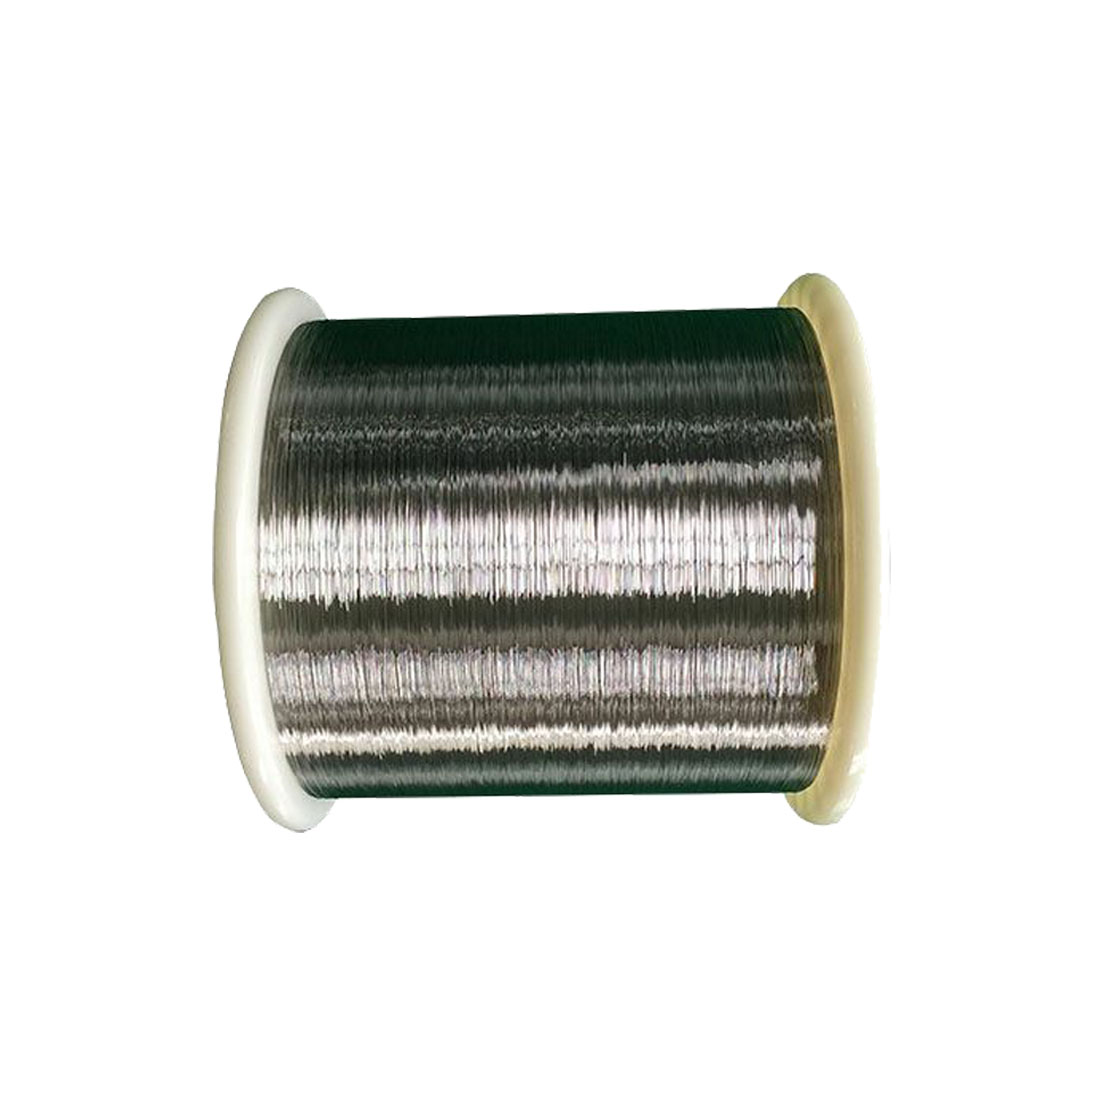 Mica tape braid high temperature nickel plated copper wire Featured Image